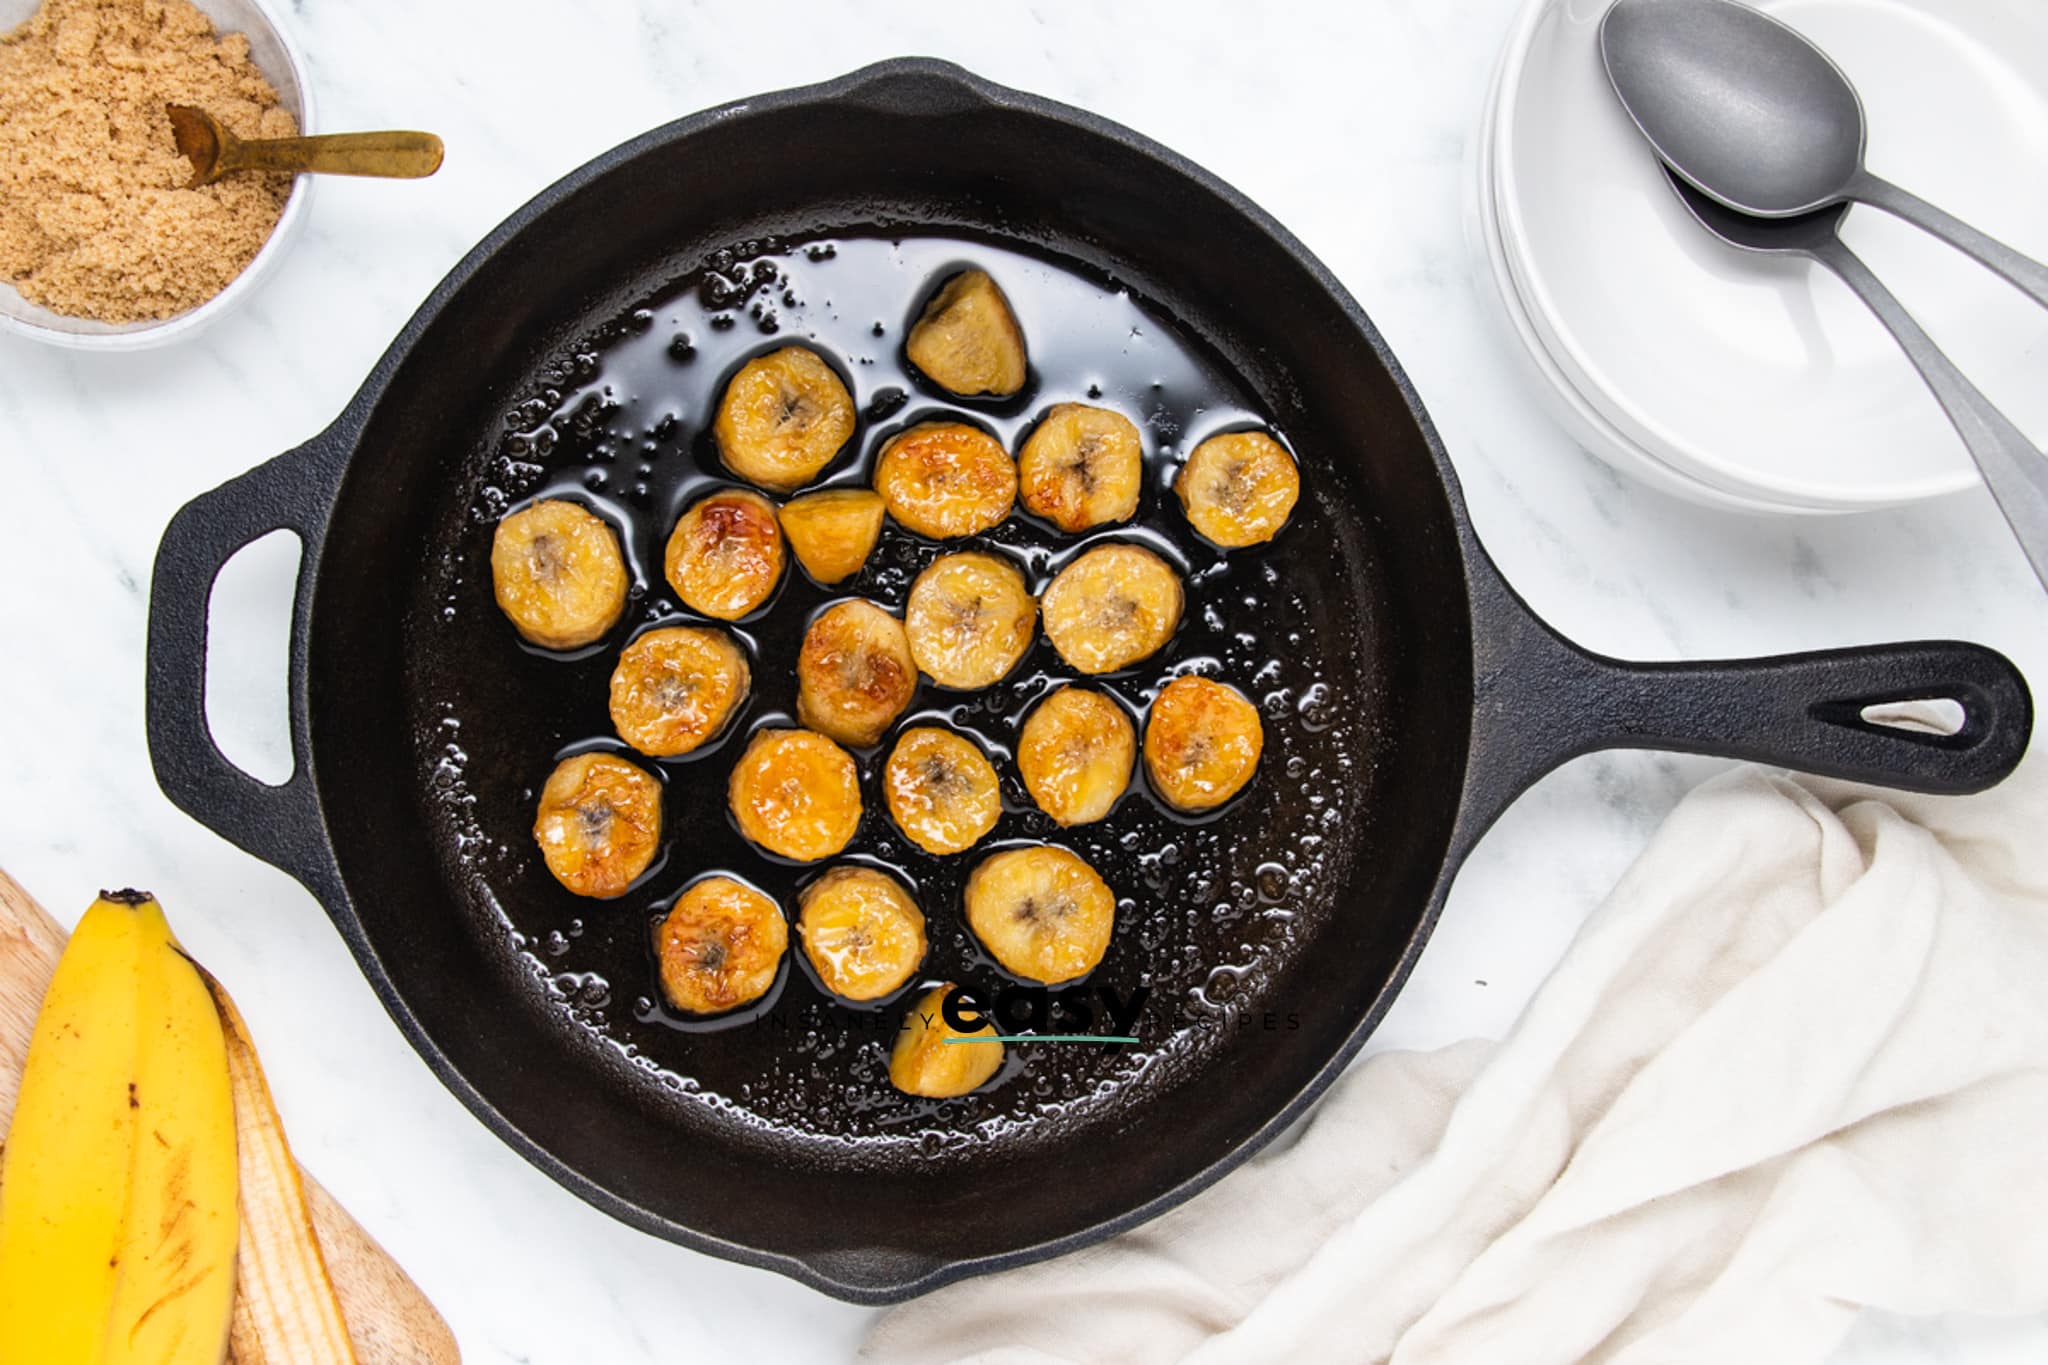 Top view photo of bananas in a cast iron skillet, caramelizing in butter.